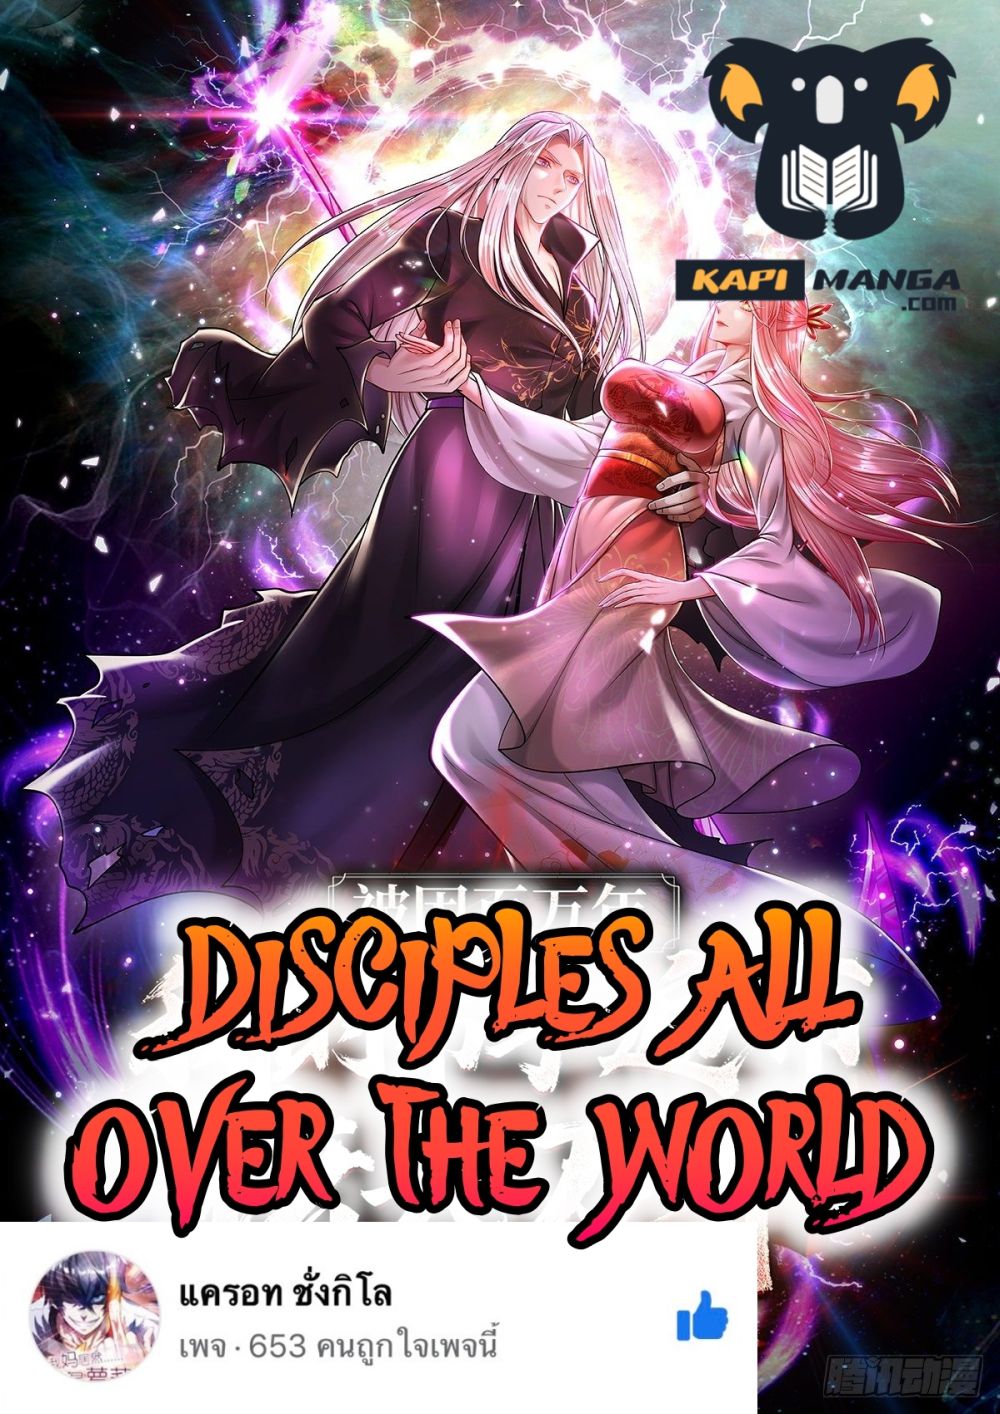 Disciples All Over the World à¸à¸­à¸à¸à¸µà¹ 28 (1)